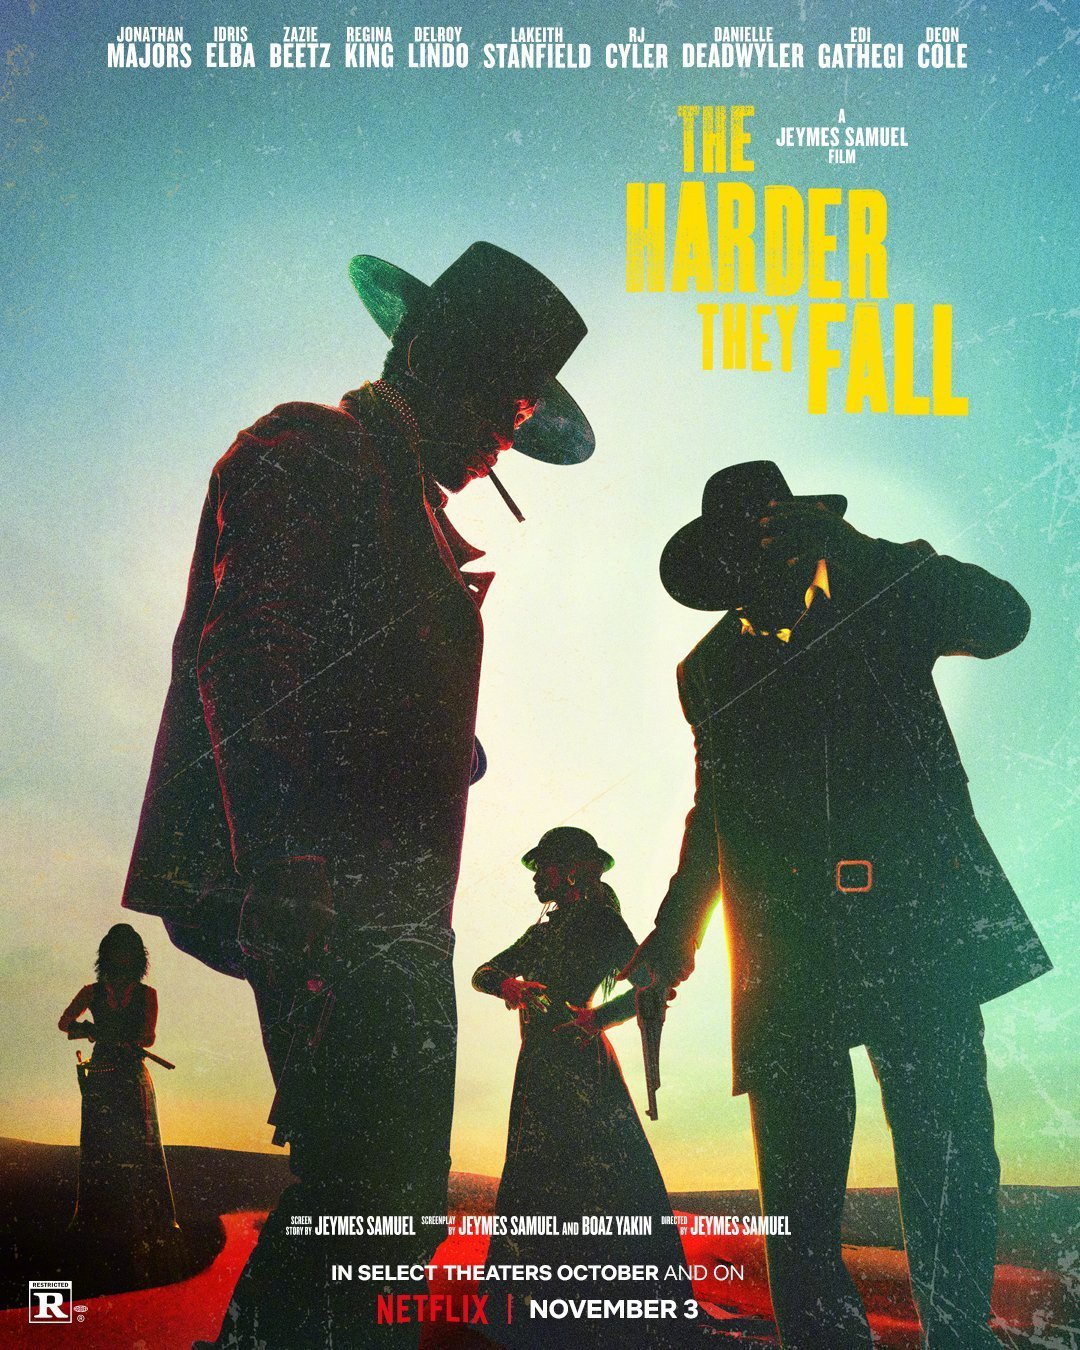 Netflix's "The Harder They Fall" revealed the official trailer and poster